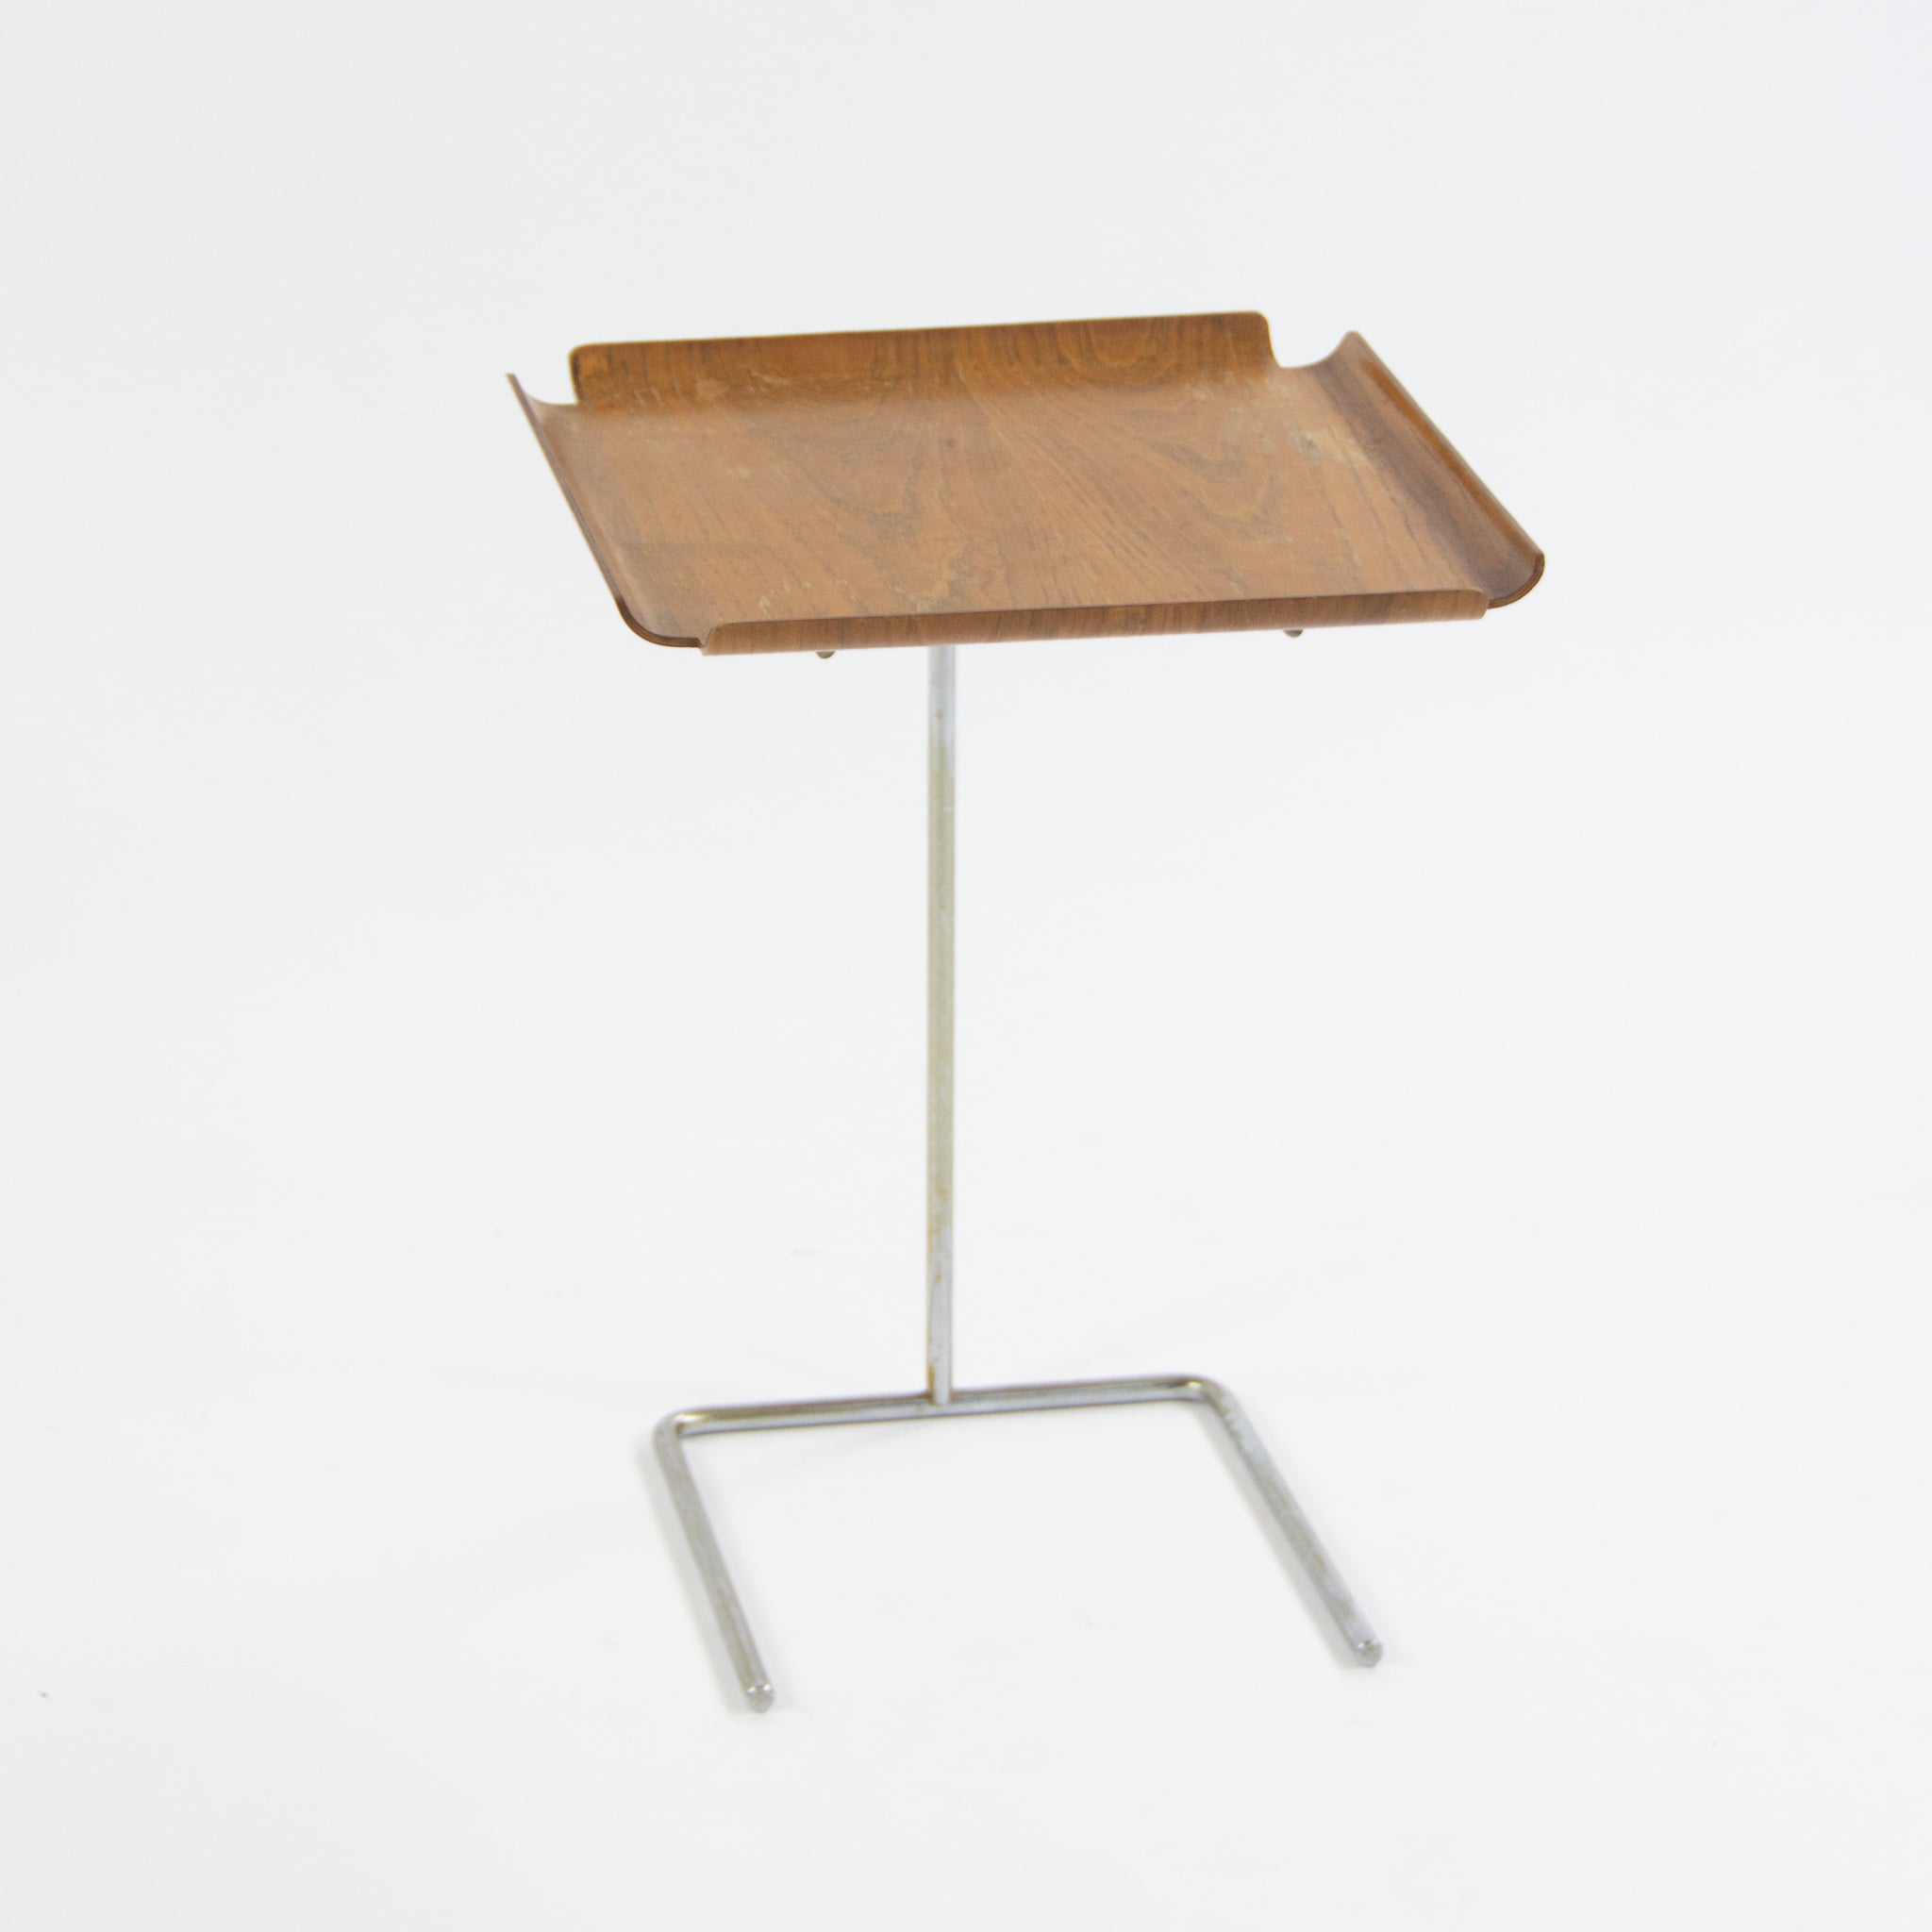 SOLD 1950's Original George Nelson & Associates Herman Miller 4950 Tray Side Table